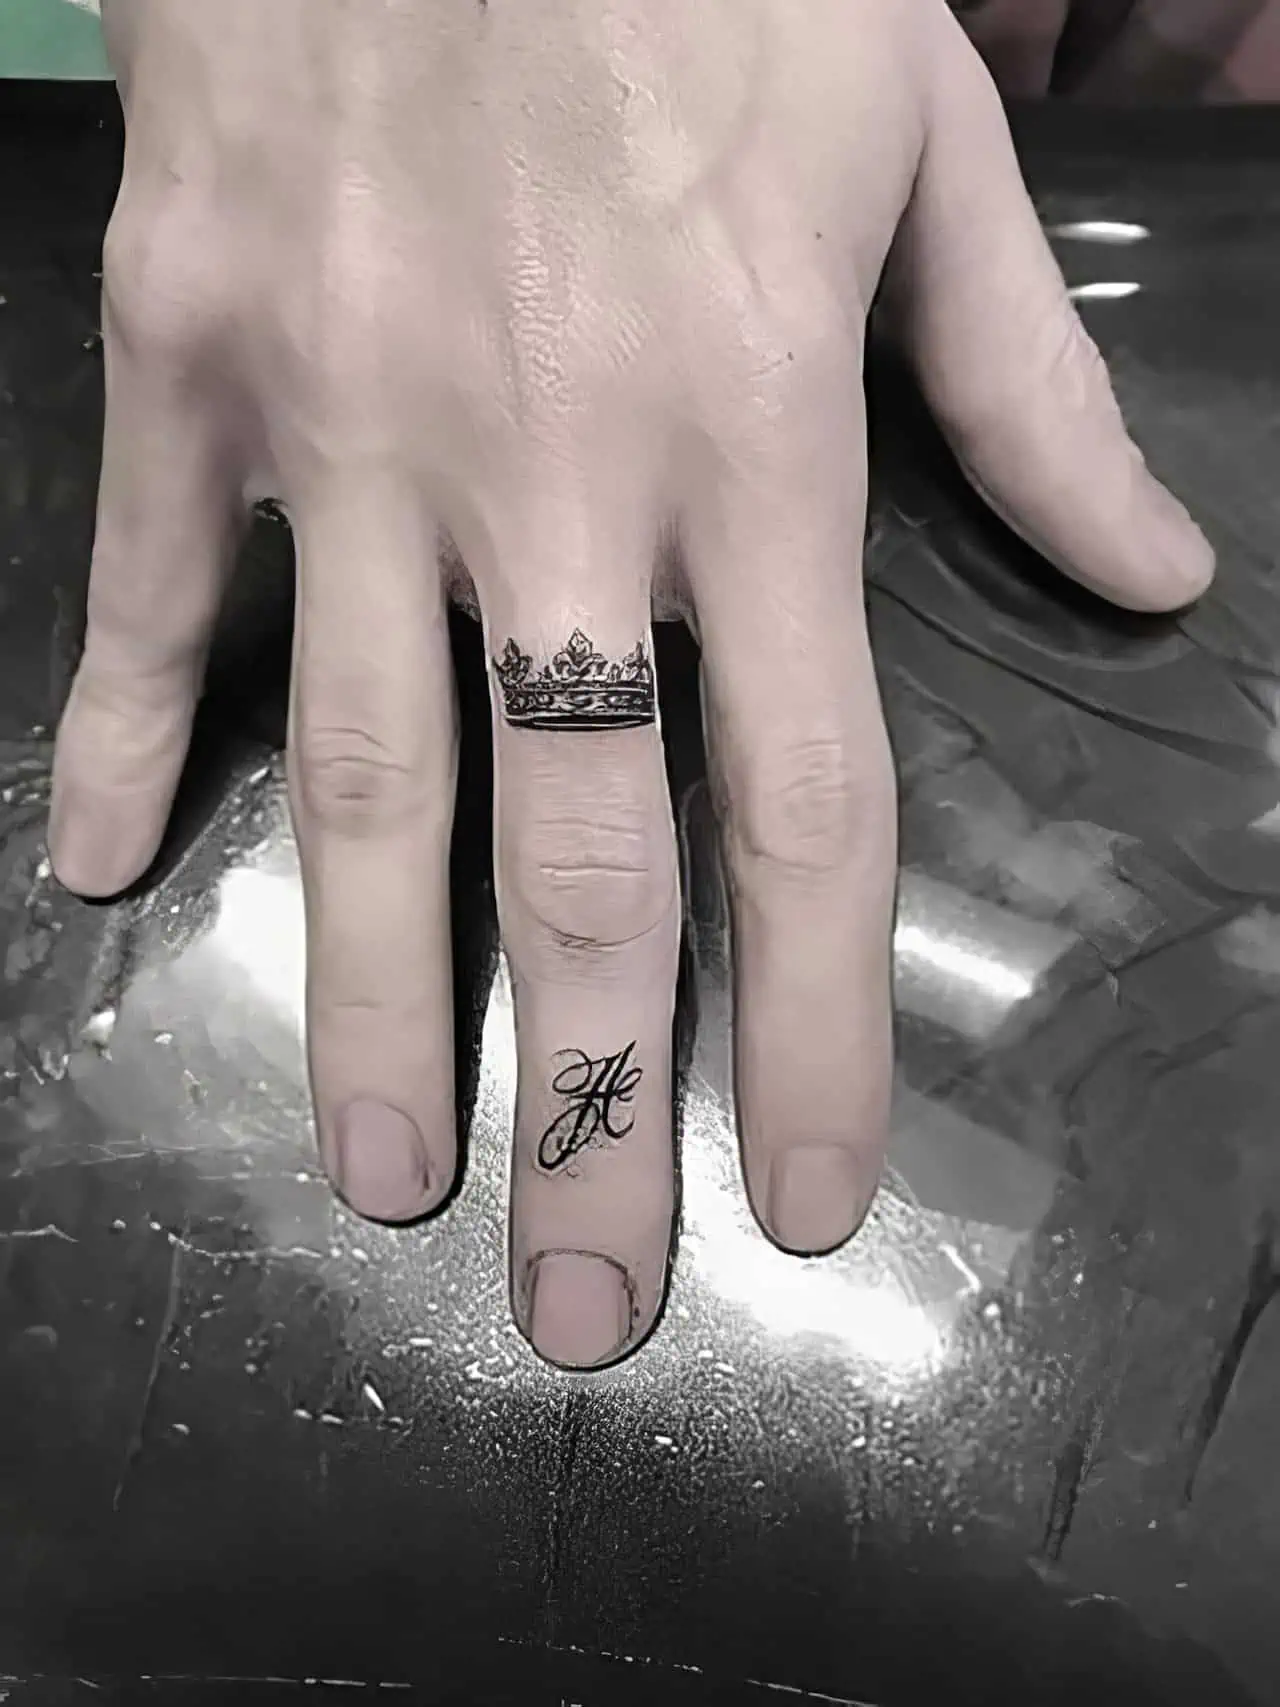 Small tattoo designs for hands | left hand tattoo for men | boys band  tattoos @StylewithDuaFatima - YouTube